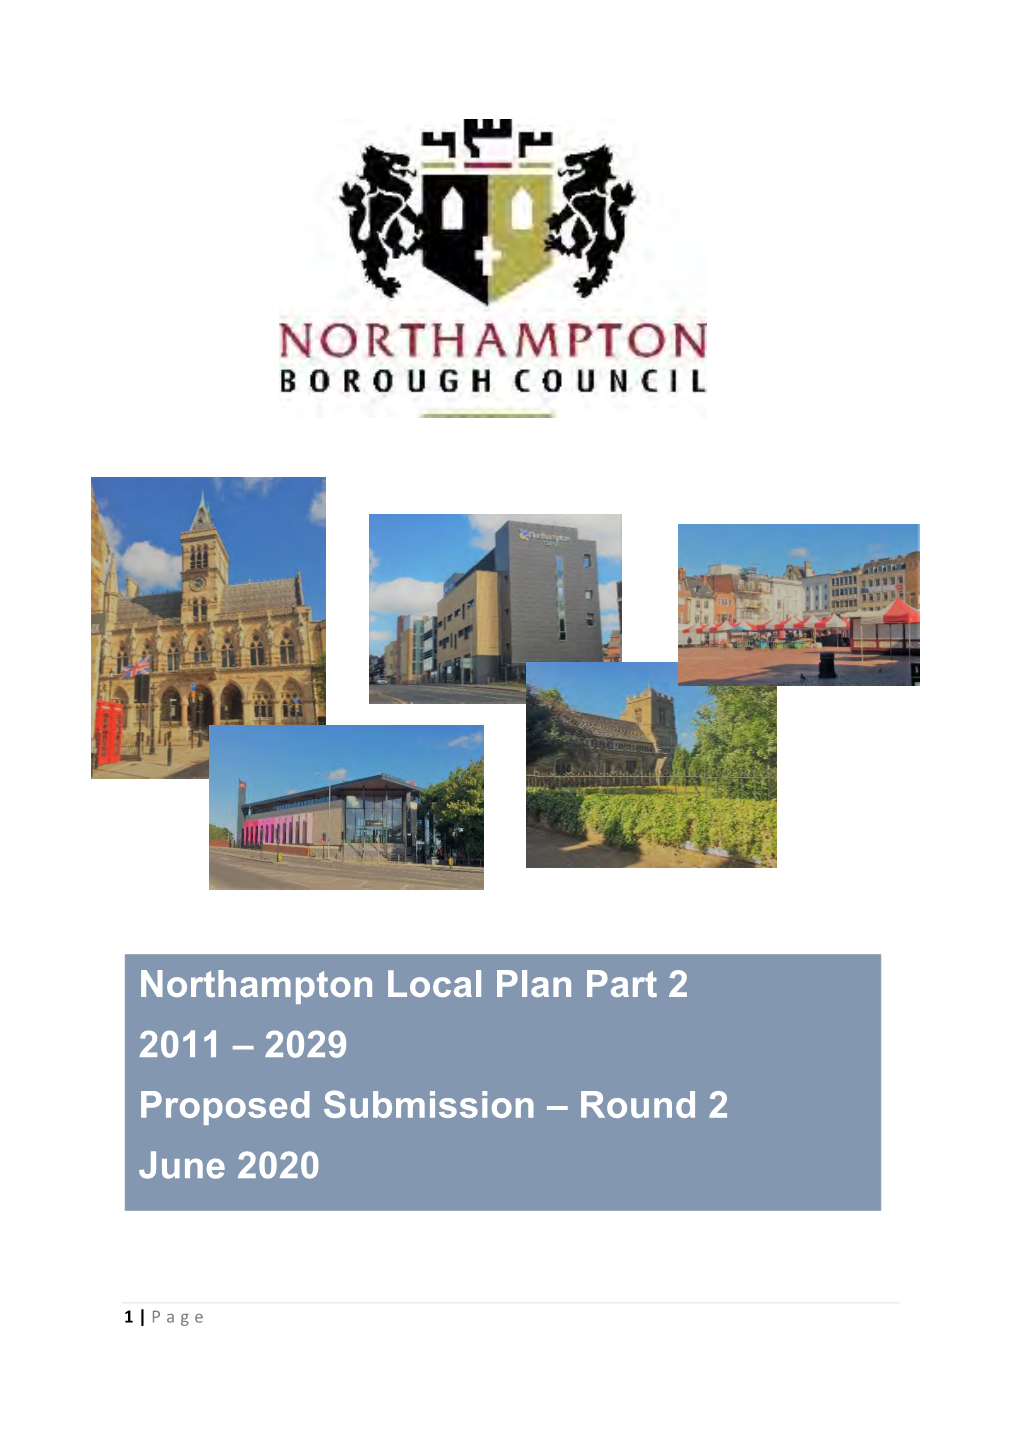 Northampton Local Plan Part 2 2011 – 2029 Proposed Submission – Round 2 June 2020